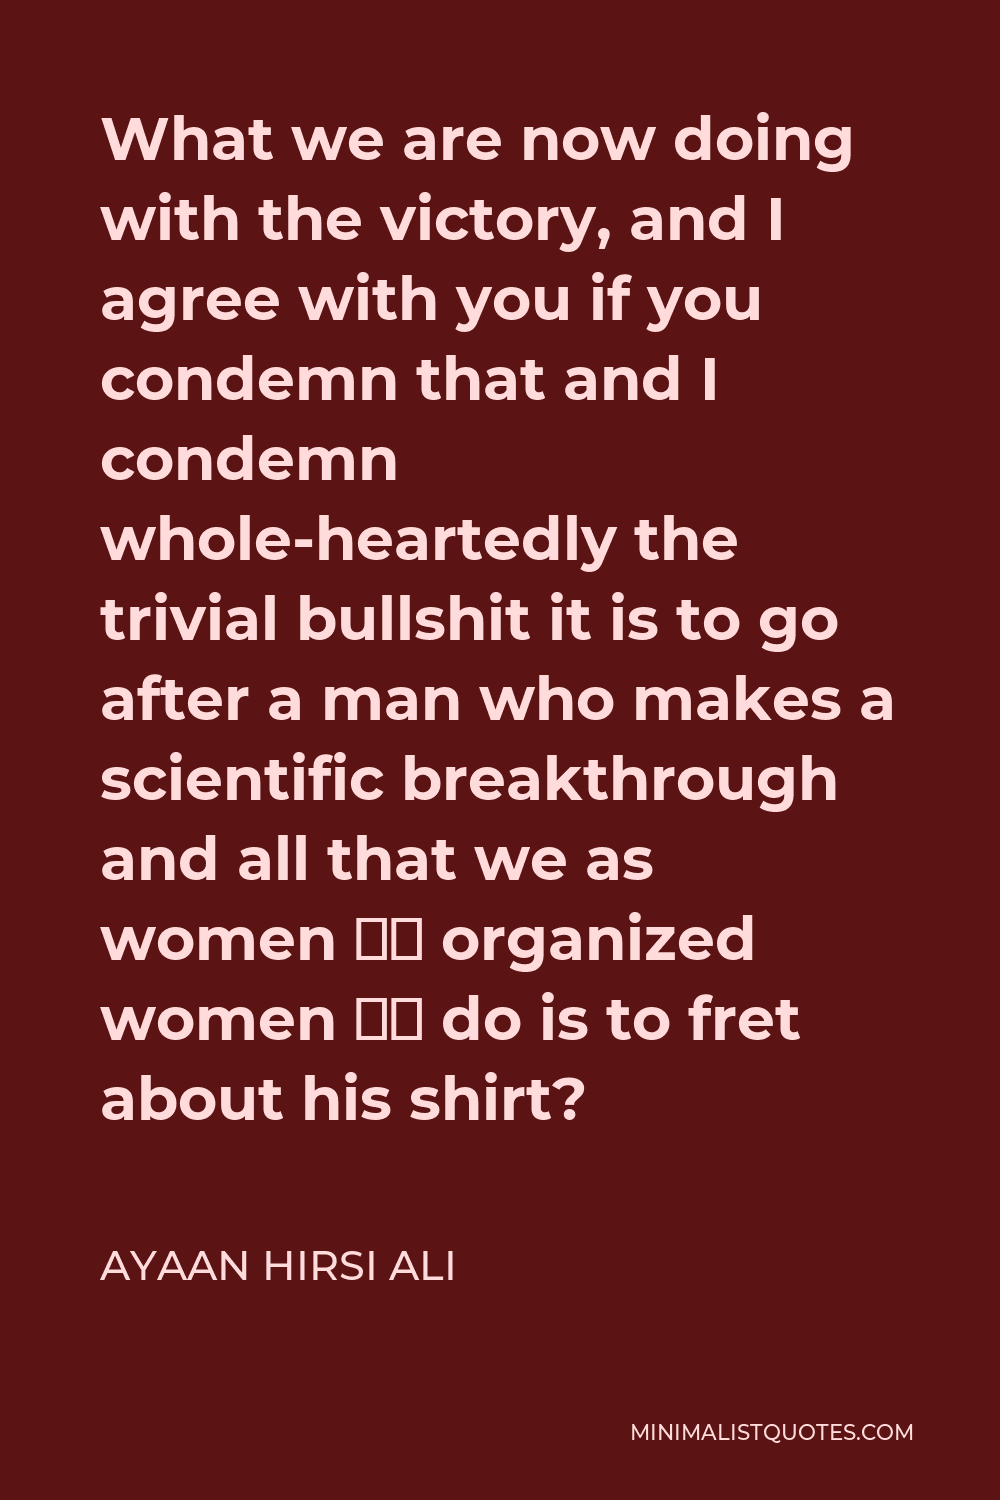 Ayaan Hirsi Ali Quote - What we are now doing with the victory, and I agree with you if you condemn that and I condemn whole-heartedly the trivial bullshit it is to go after a man who makes a scientific breakthrough and all that we as women — organized women — do is to fret about his shirt?